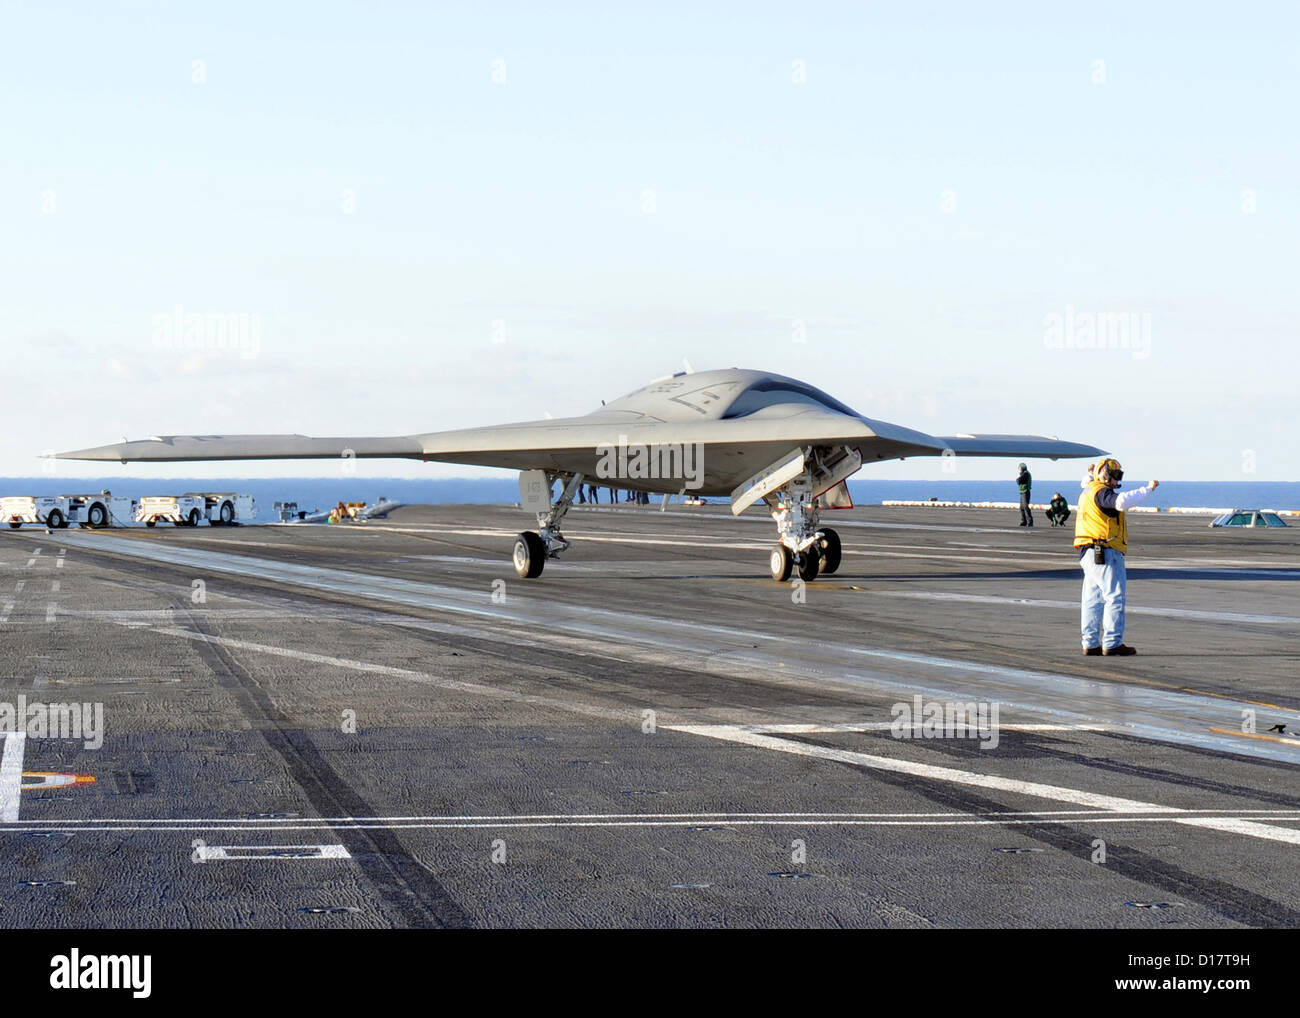 The X-47B Unmanned Combat Air System taxies on the flight deck of the aircraft carrier USS Harry S. Truman underway December 9, 2012 in the Atlantic Ocean. The Harry S. Truman is the first aircraft carrier to host test operations for an unmanned aircraft. Stock Photo